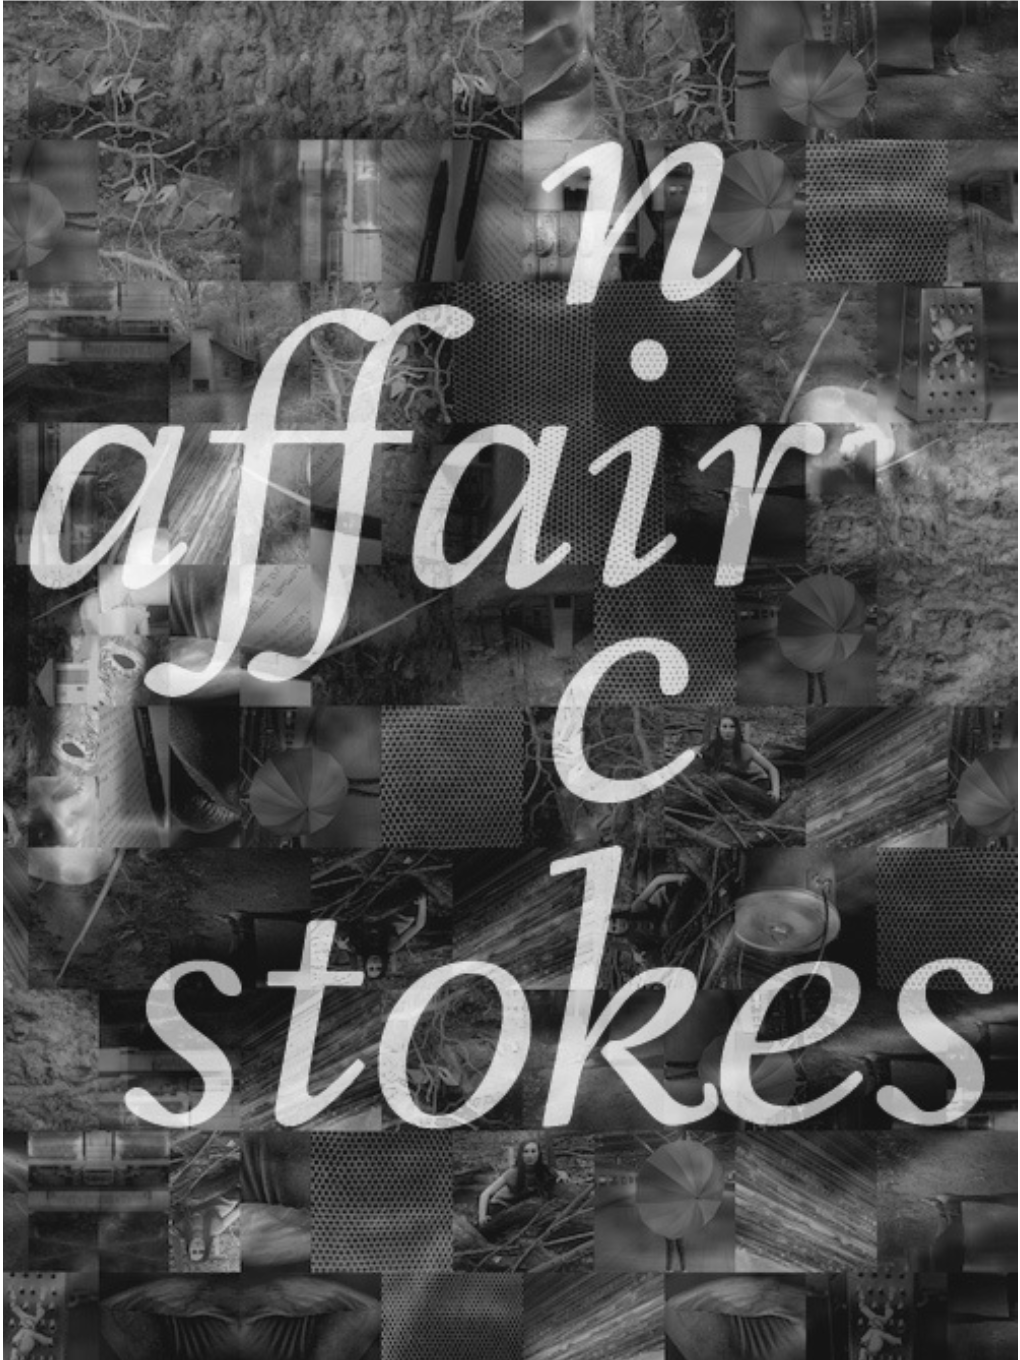 Affair by Nick Stokes